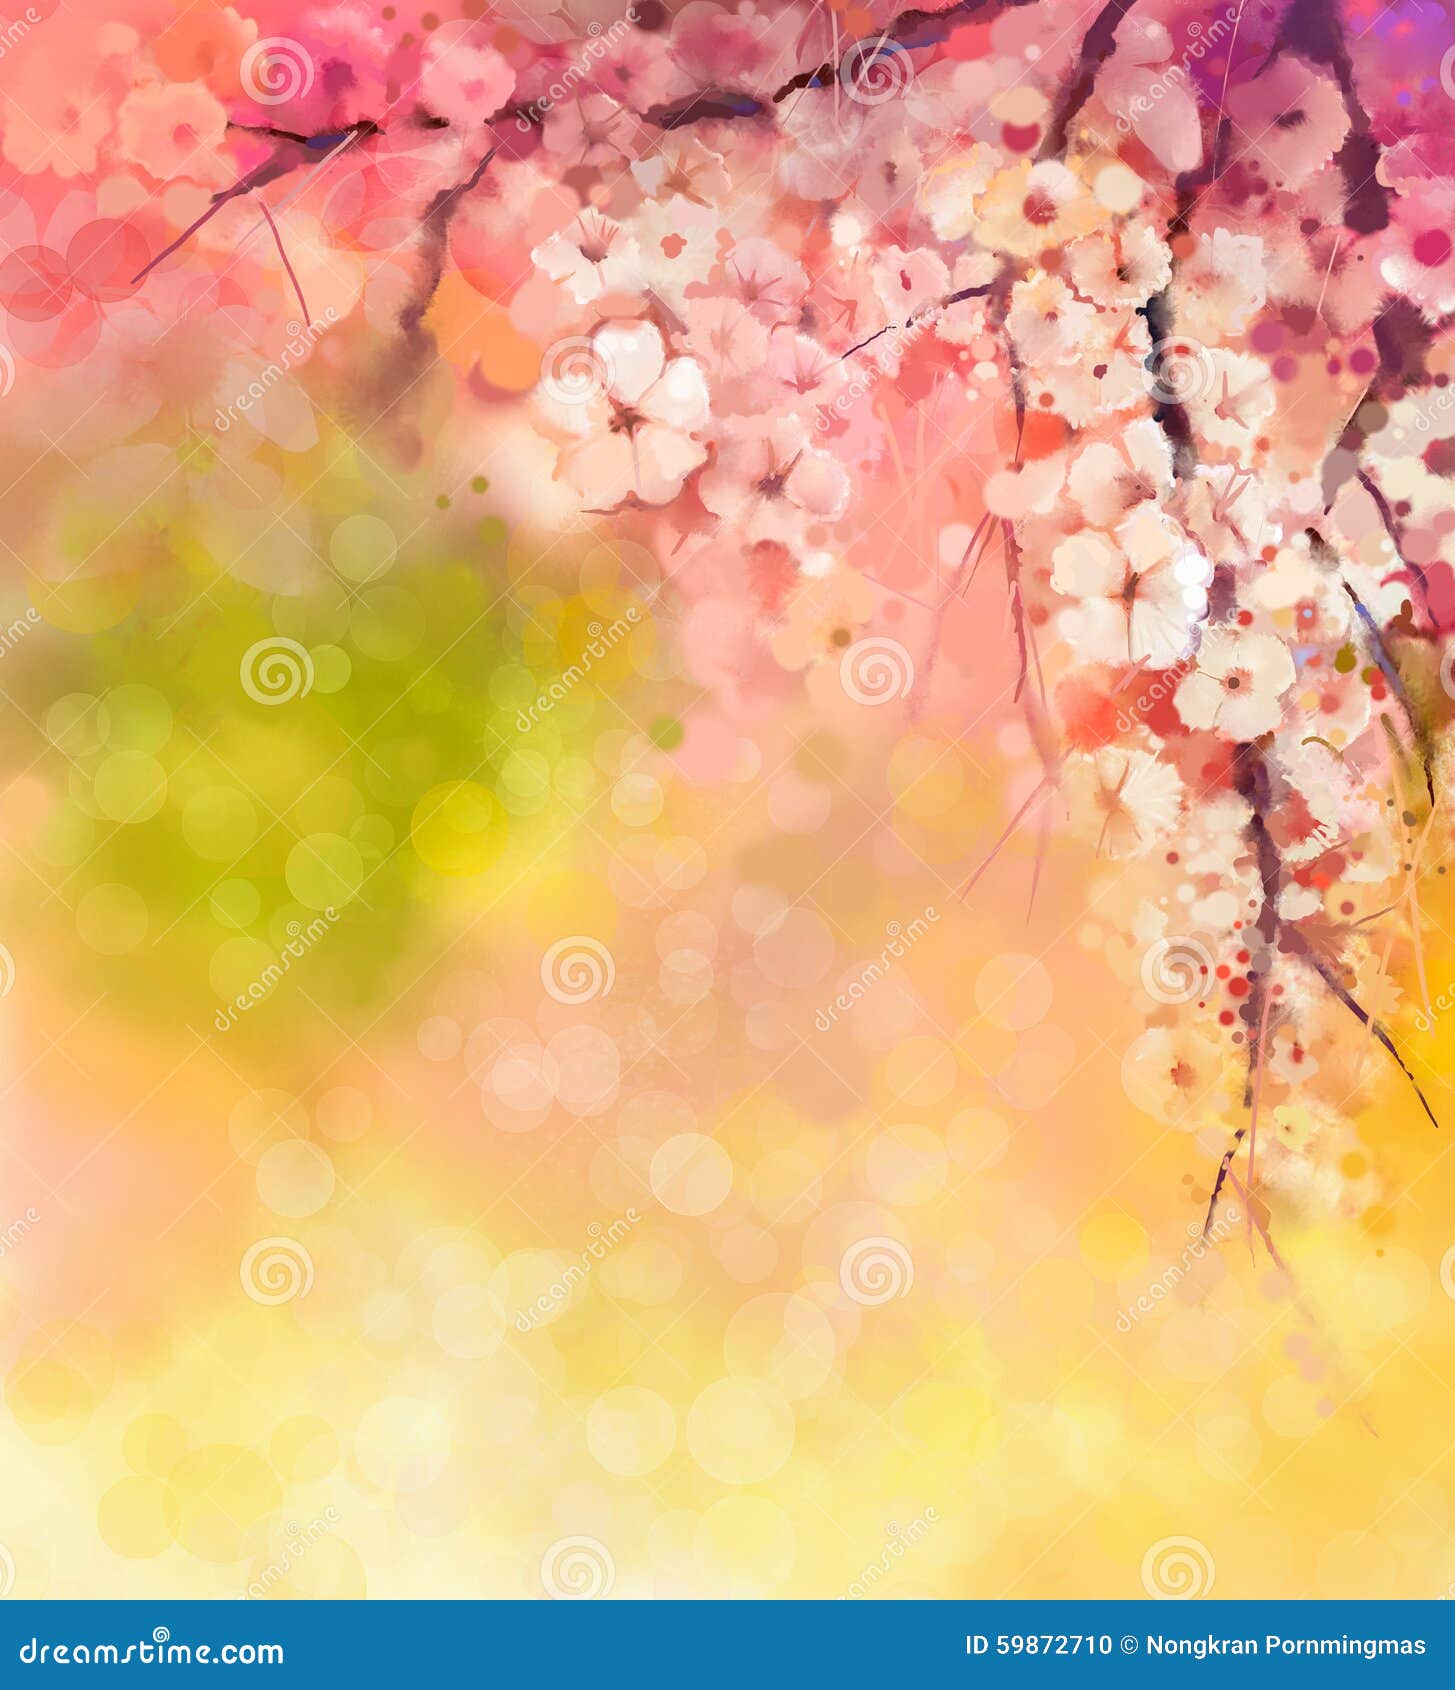 watercolor painting cherry blossoms japanese sakura floral soft color over blurred nature background spring flower 59872710